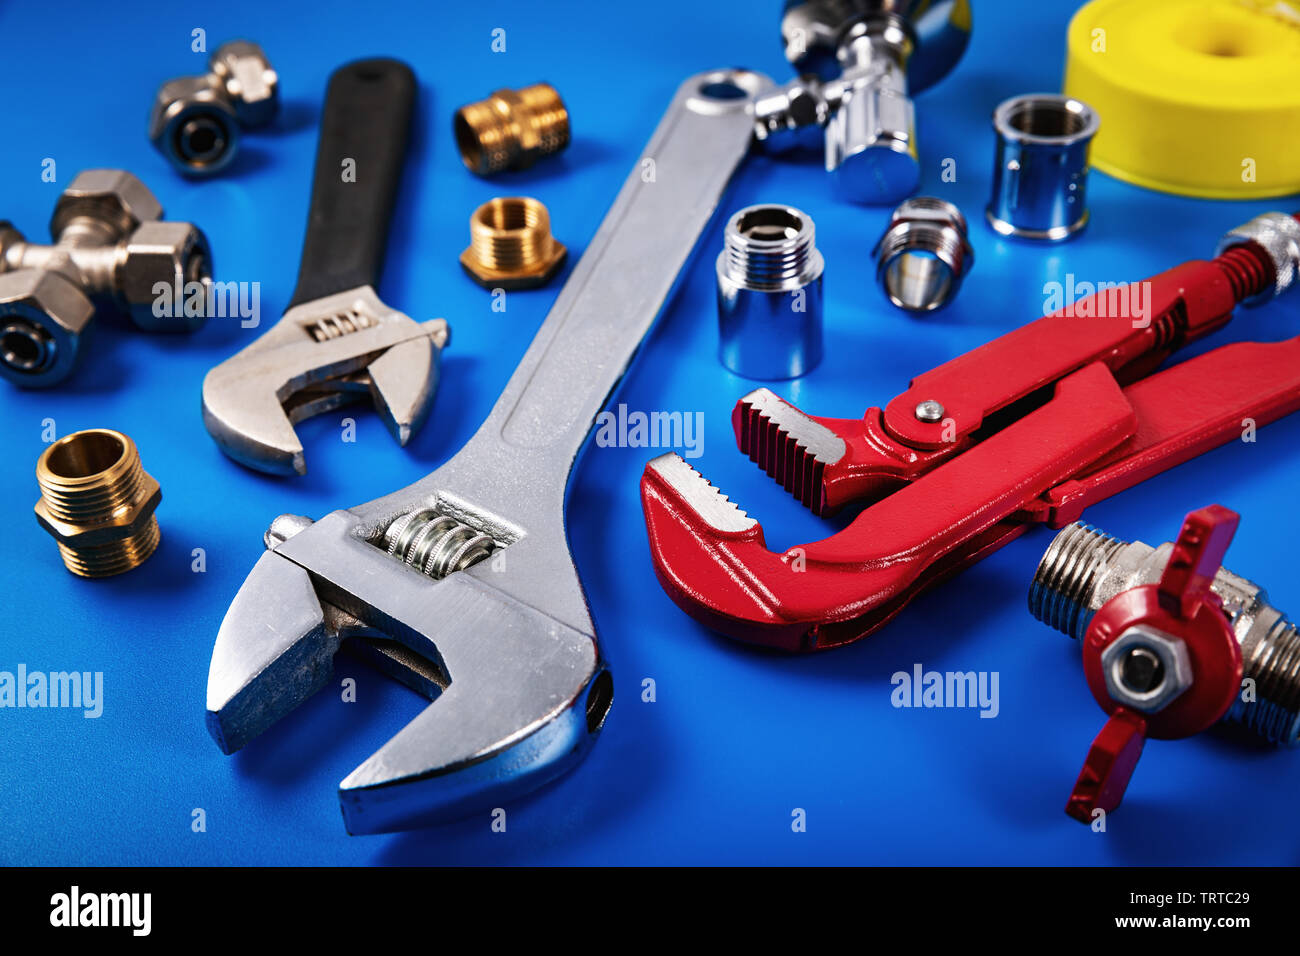 plumbing tools and fittings on blue background Stock Photo